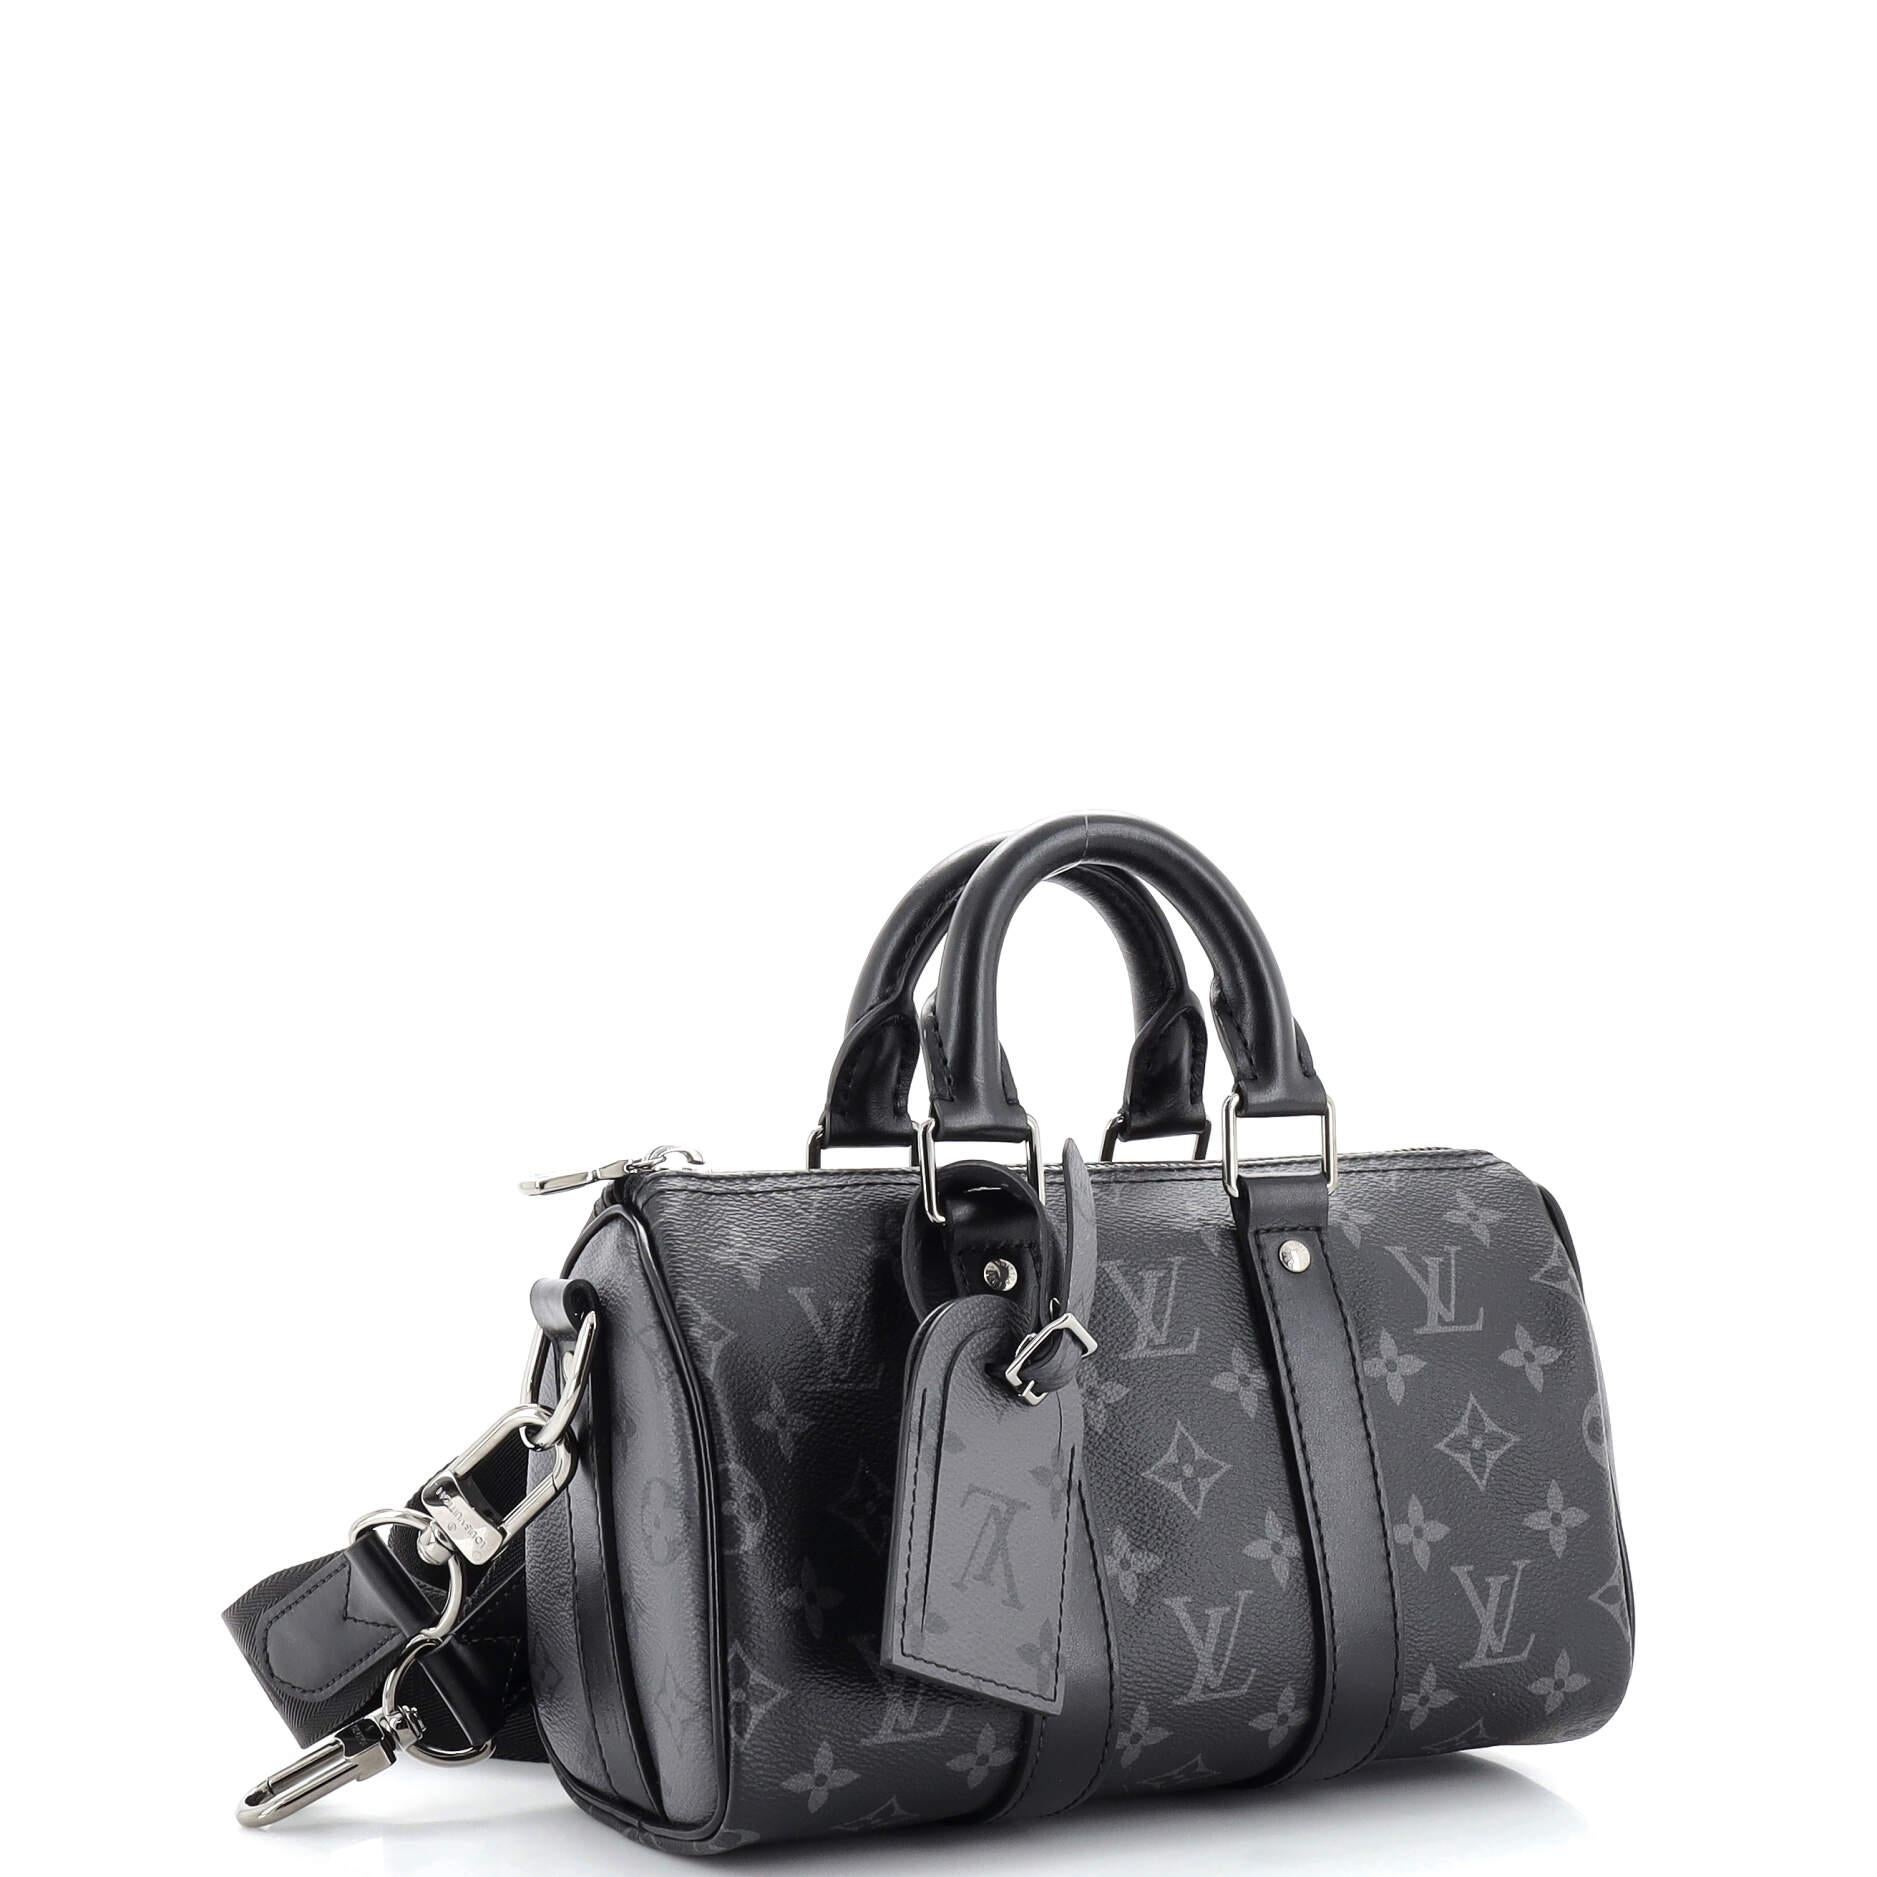 Louis Vuitton Keepall 25 Bandouliere - 5 For Sale on 1stDibs  lv keepall  bandoulière 25, louis vuitton keepall 25 blown up, kepall 25